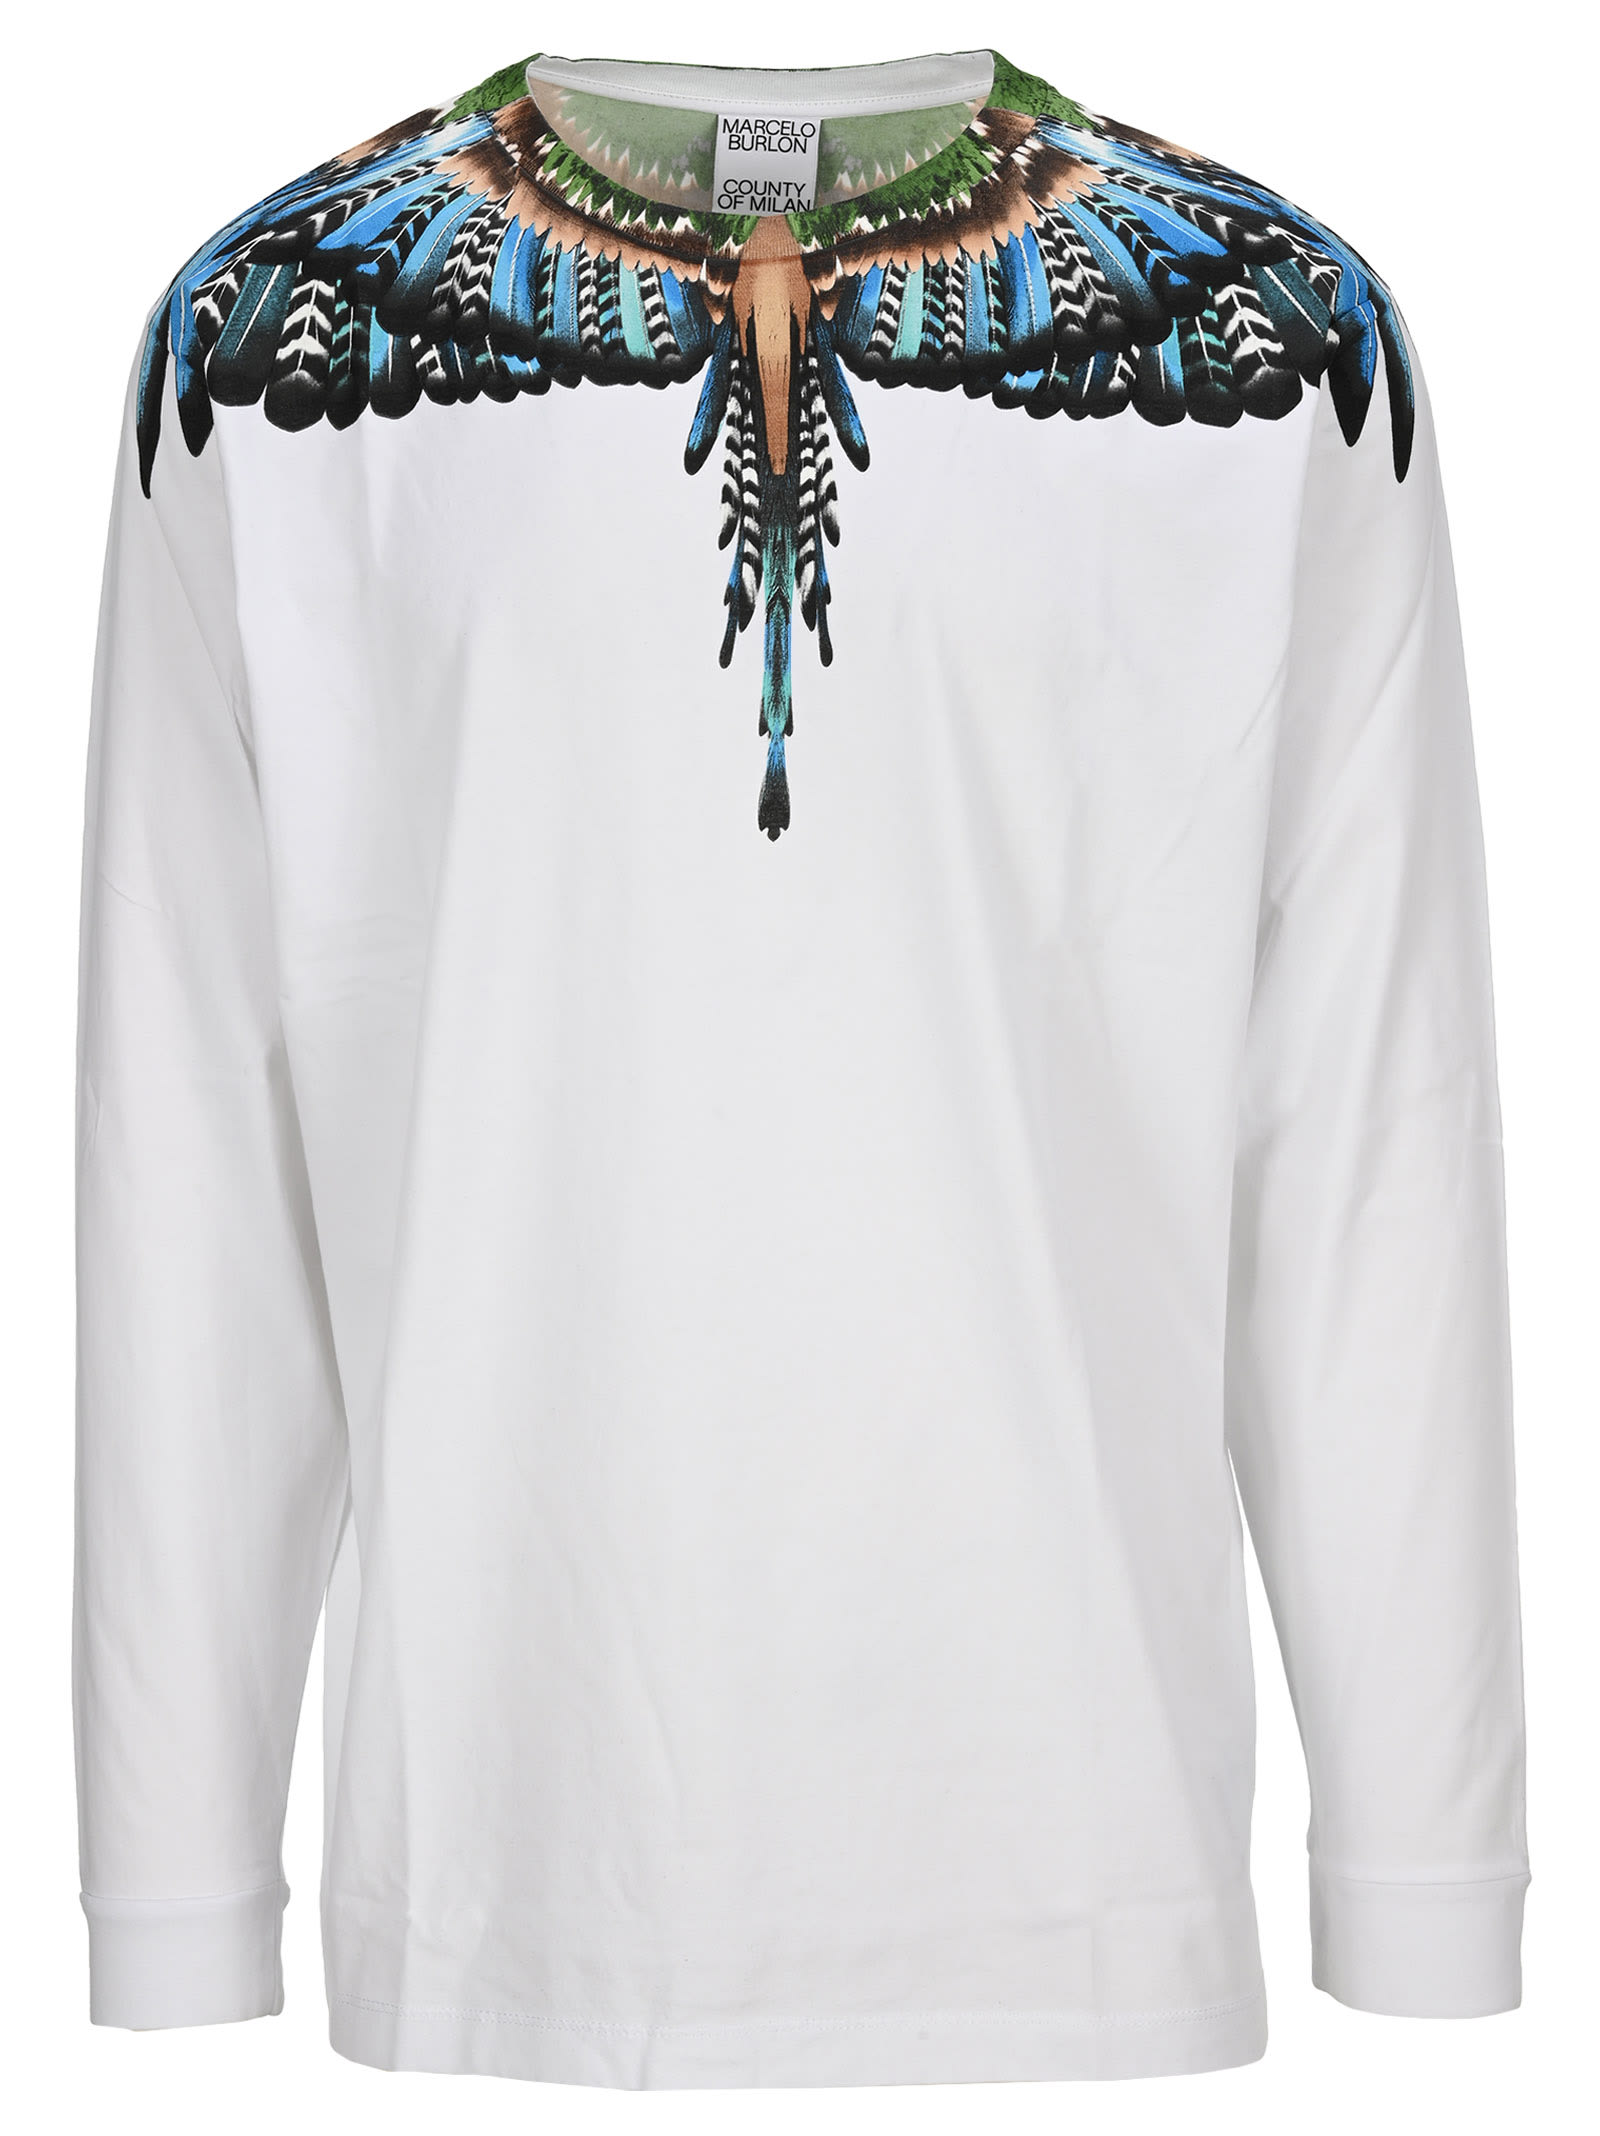 Marcelo Burlon Grizzly Wings Long Sleeves T-shirt